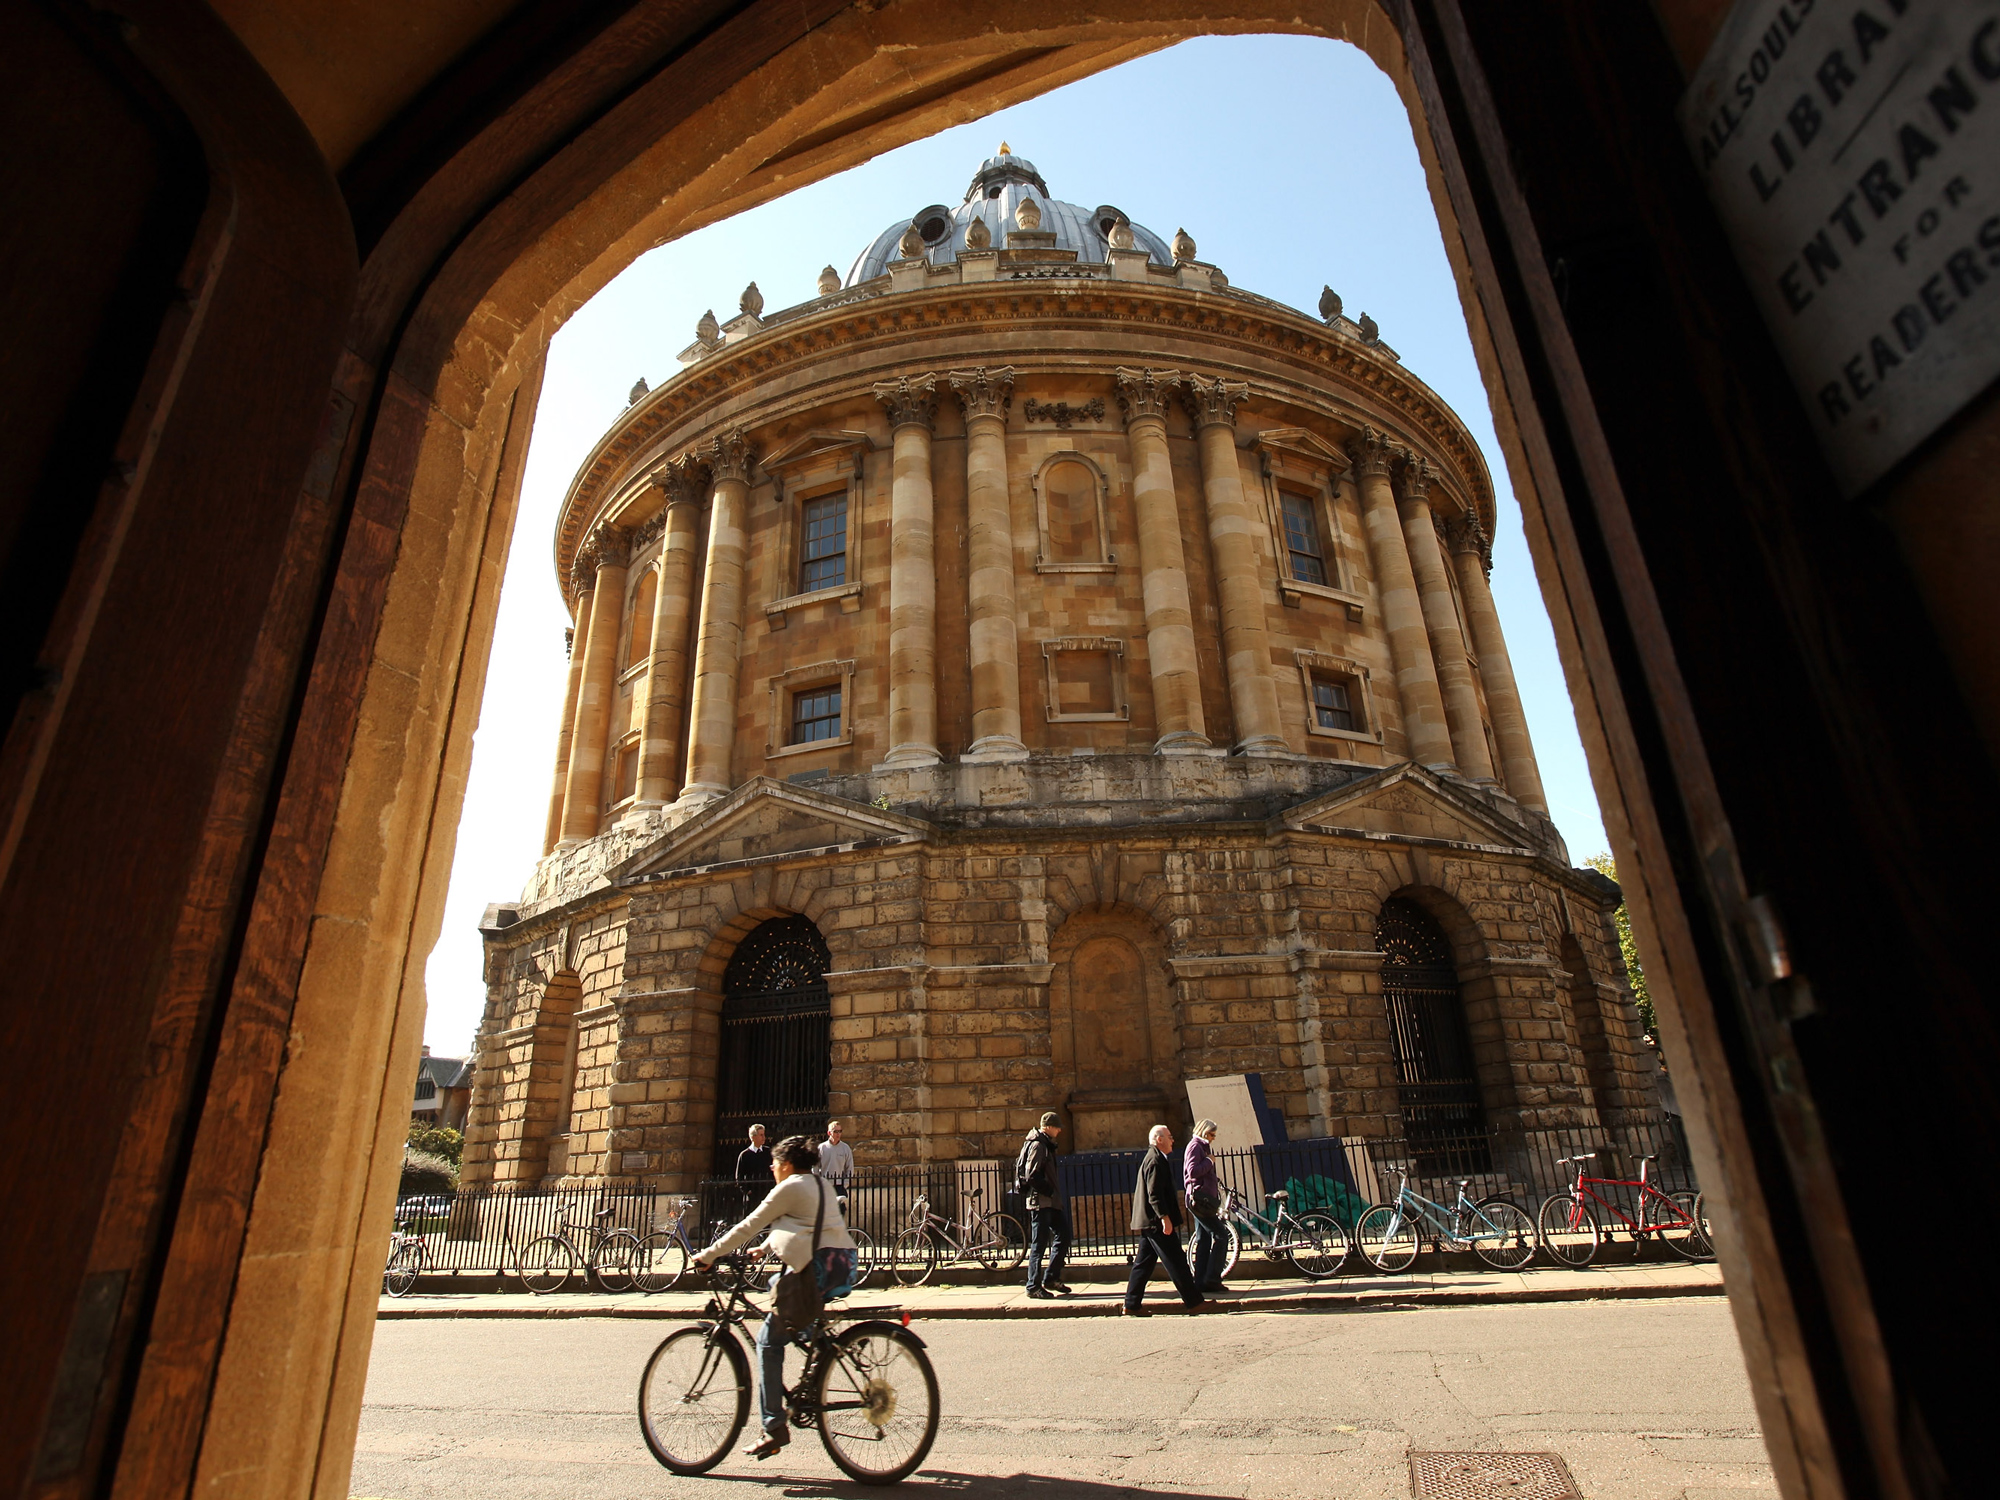 The Radcliffe Camera building at Oxford University.